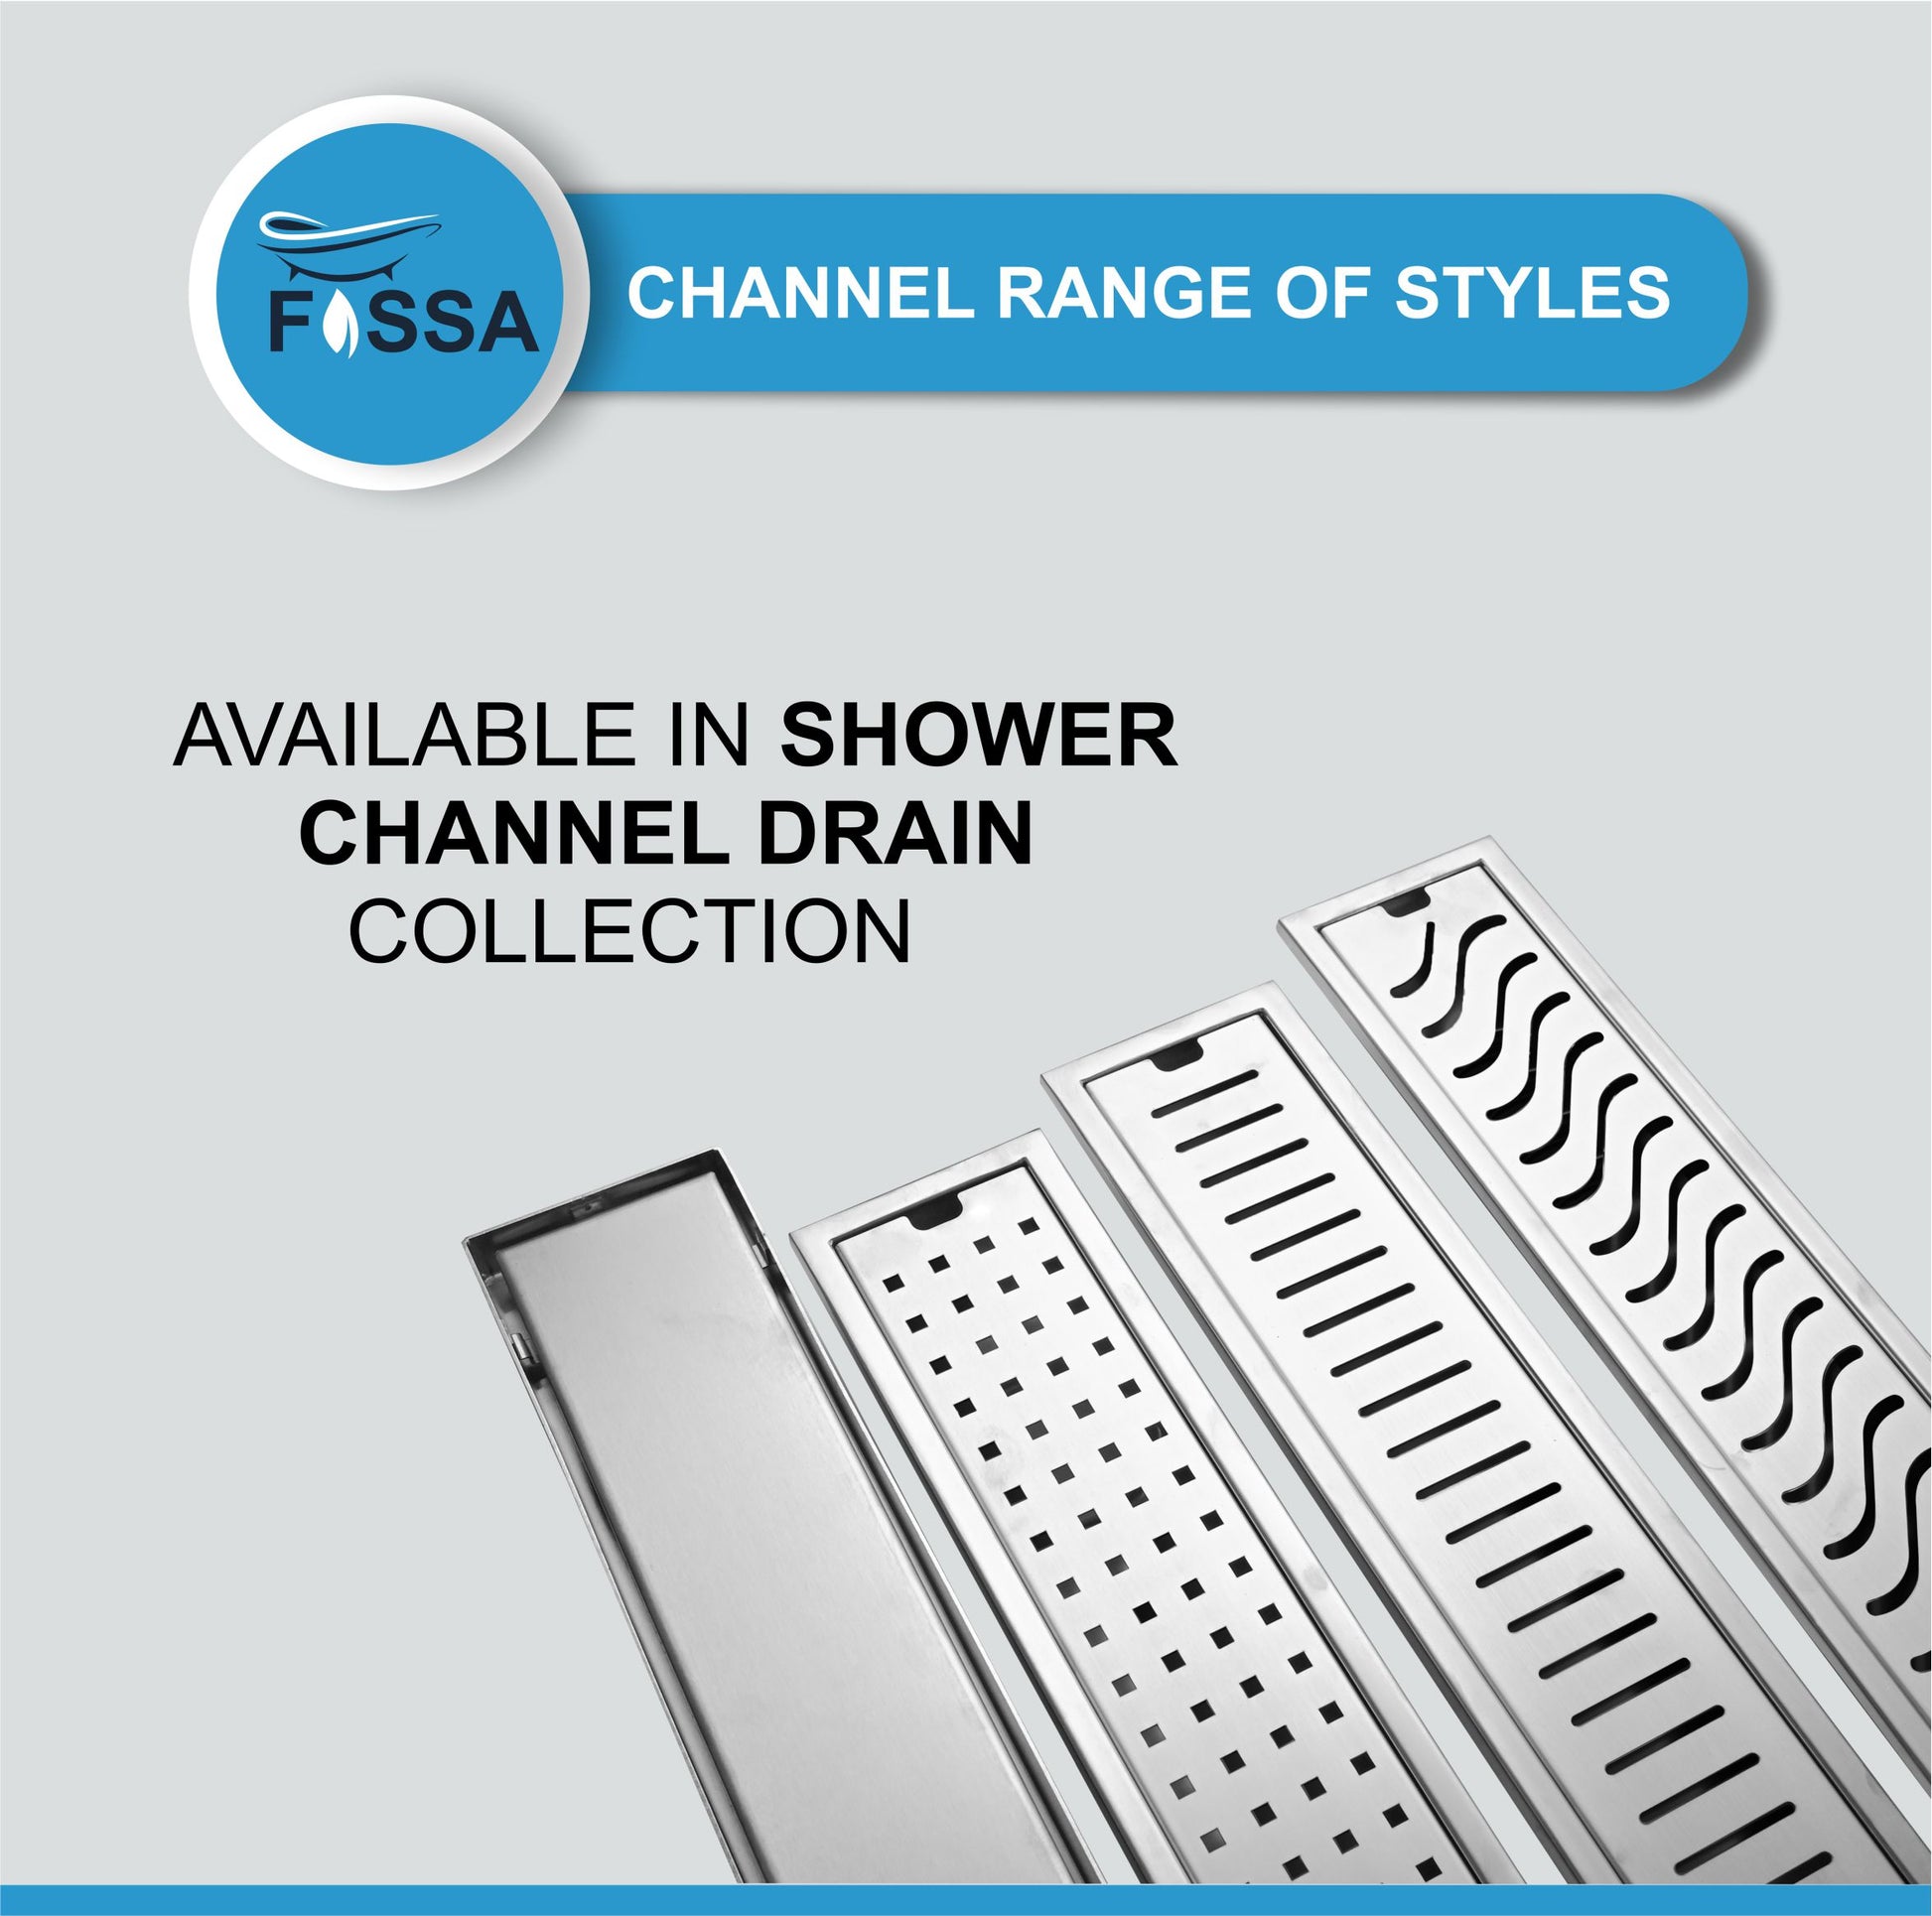 Fossa 36"x 4" Shower Wave Brushed Drain Side Hole Rectangular Floor Drain with Accessories Wave Hole Pattern Cover Grate Removable 304 Stainless Steel (36 inch) Fossa Home